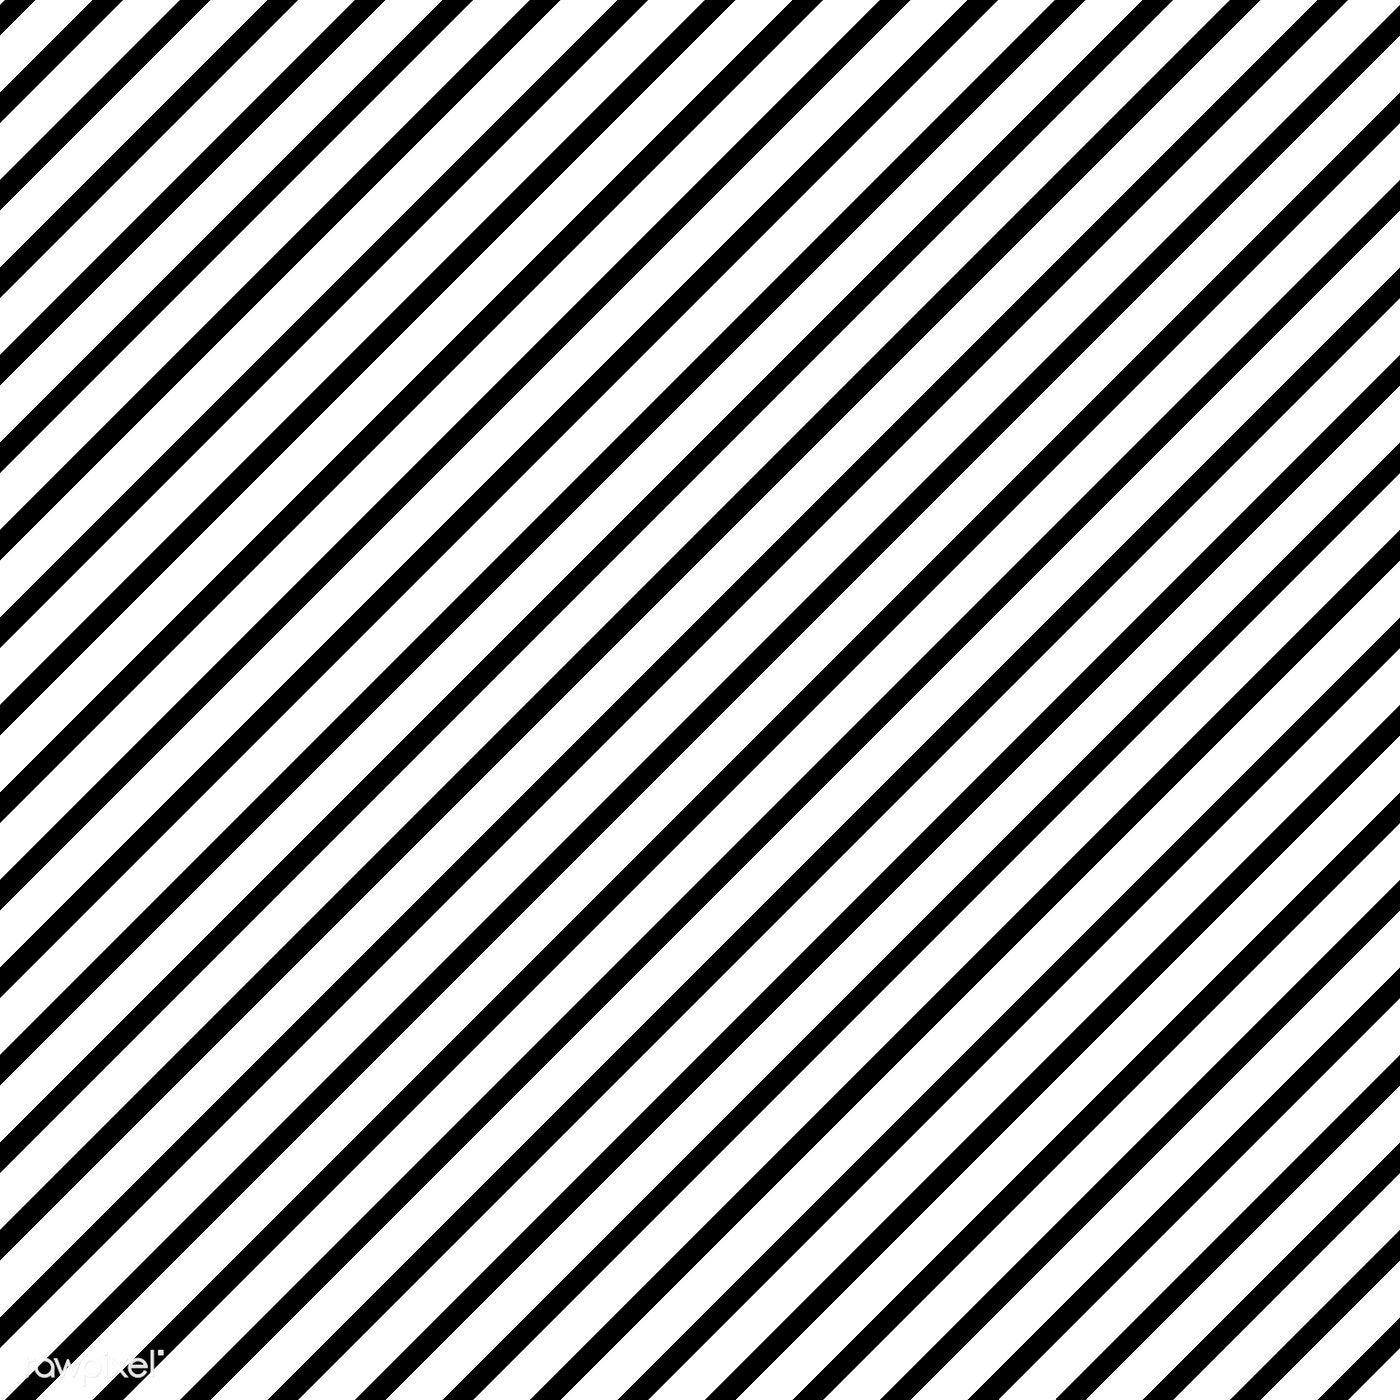 Black and white seamless striped pattern vector. free image by rawpixel.com / filmful. Halftone pattern, Stripes pattern design, Vector free